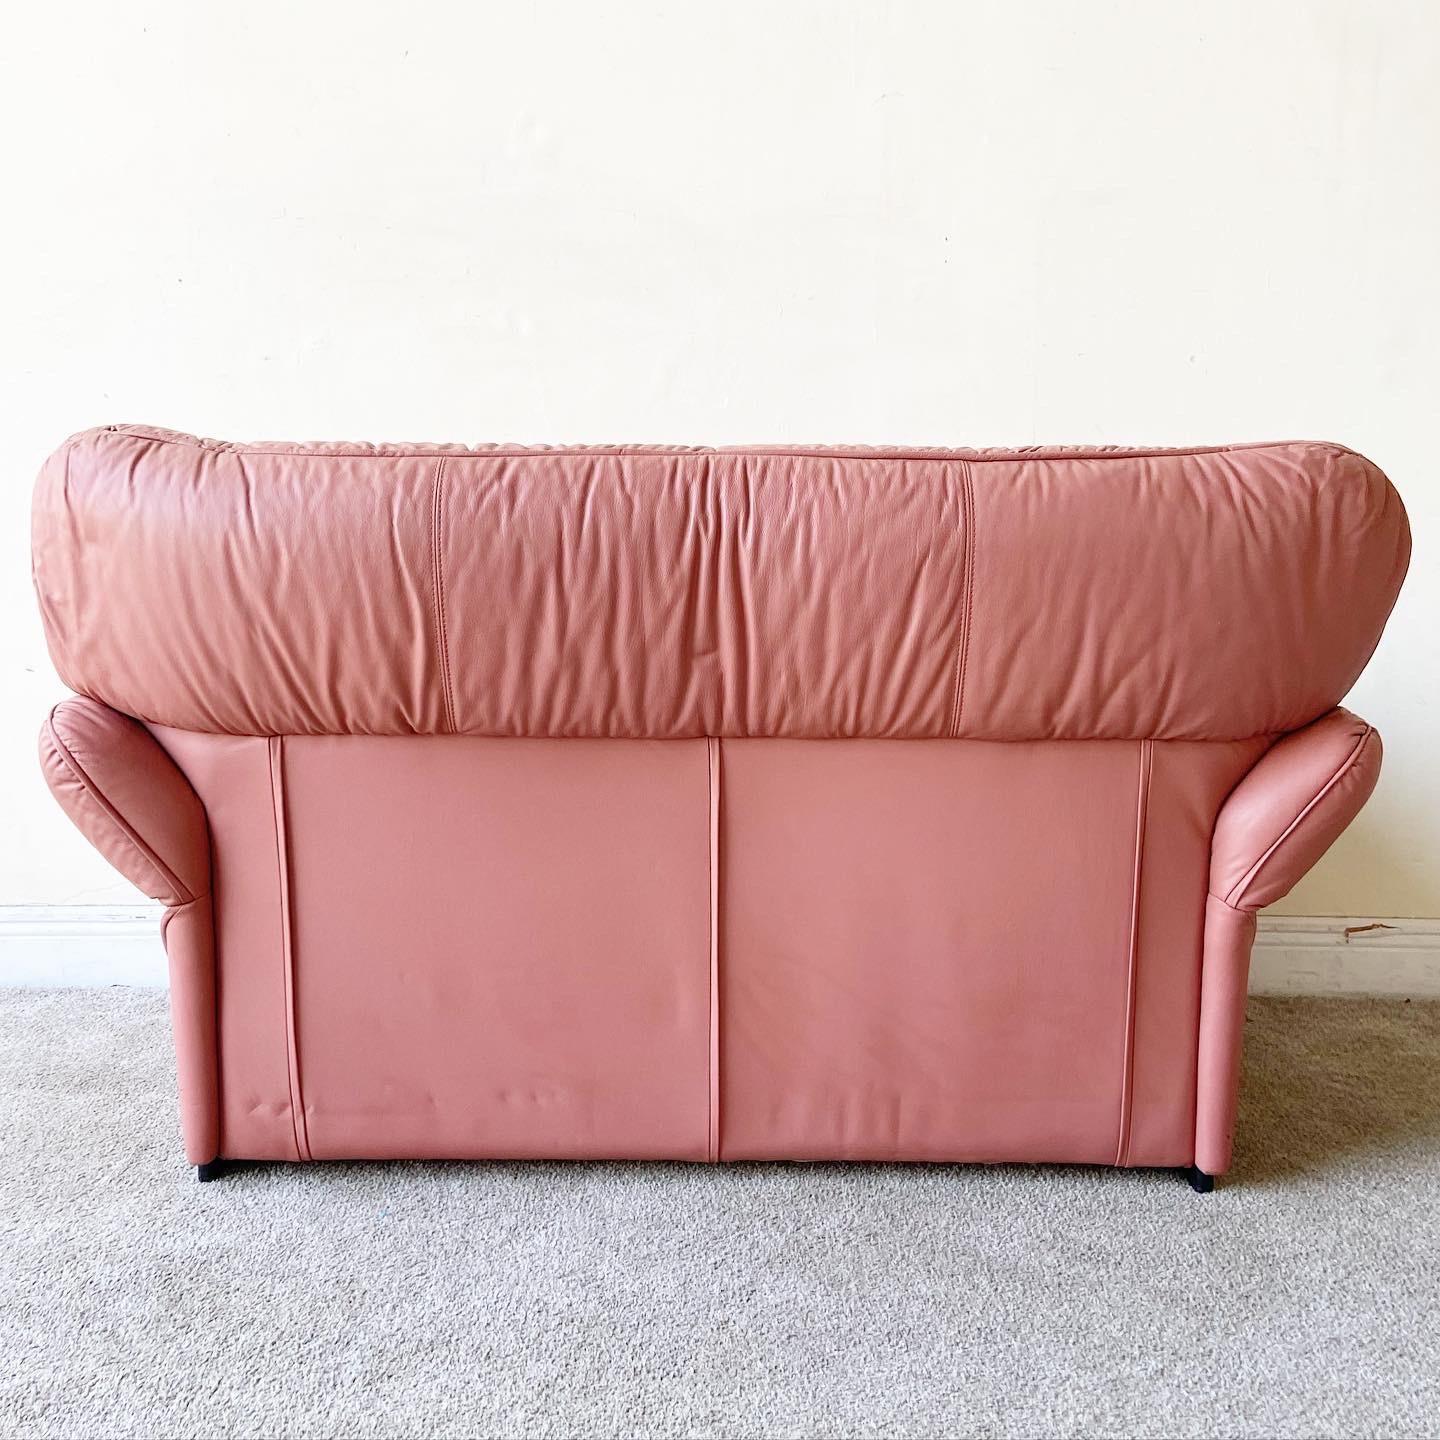 pink leather sofa for sale